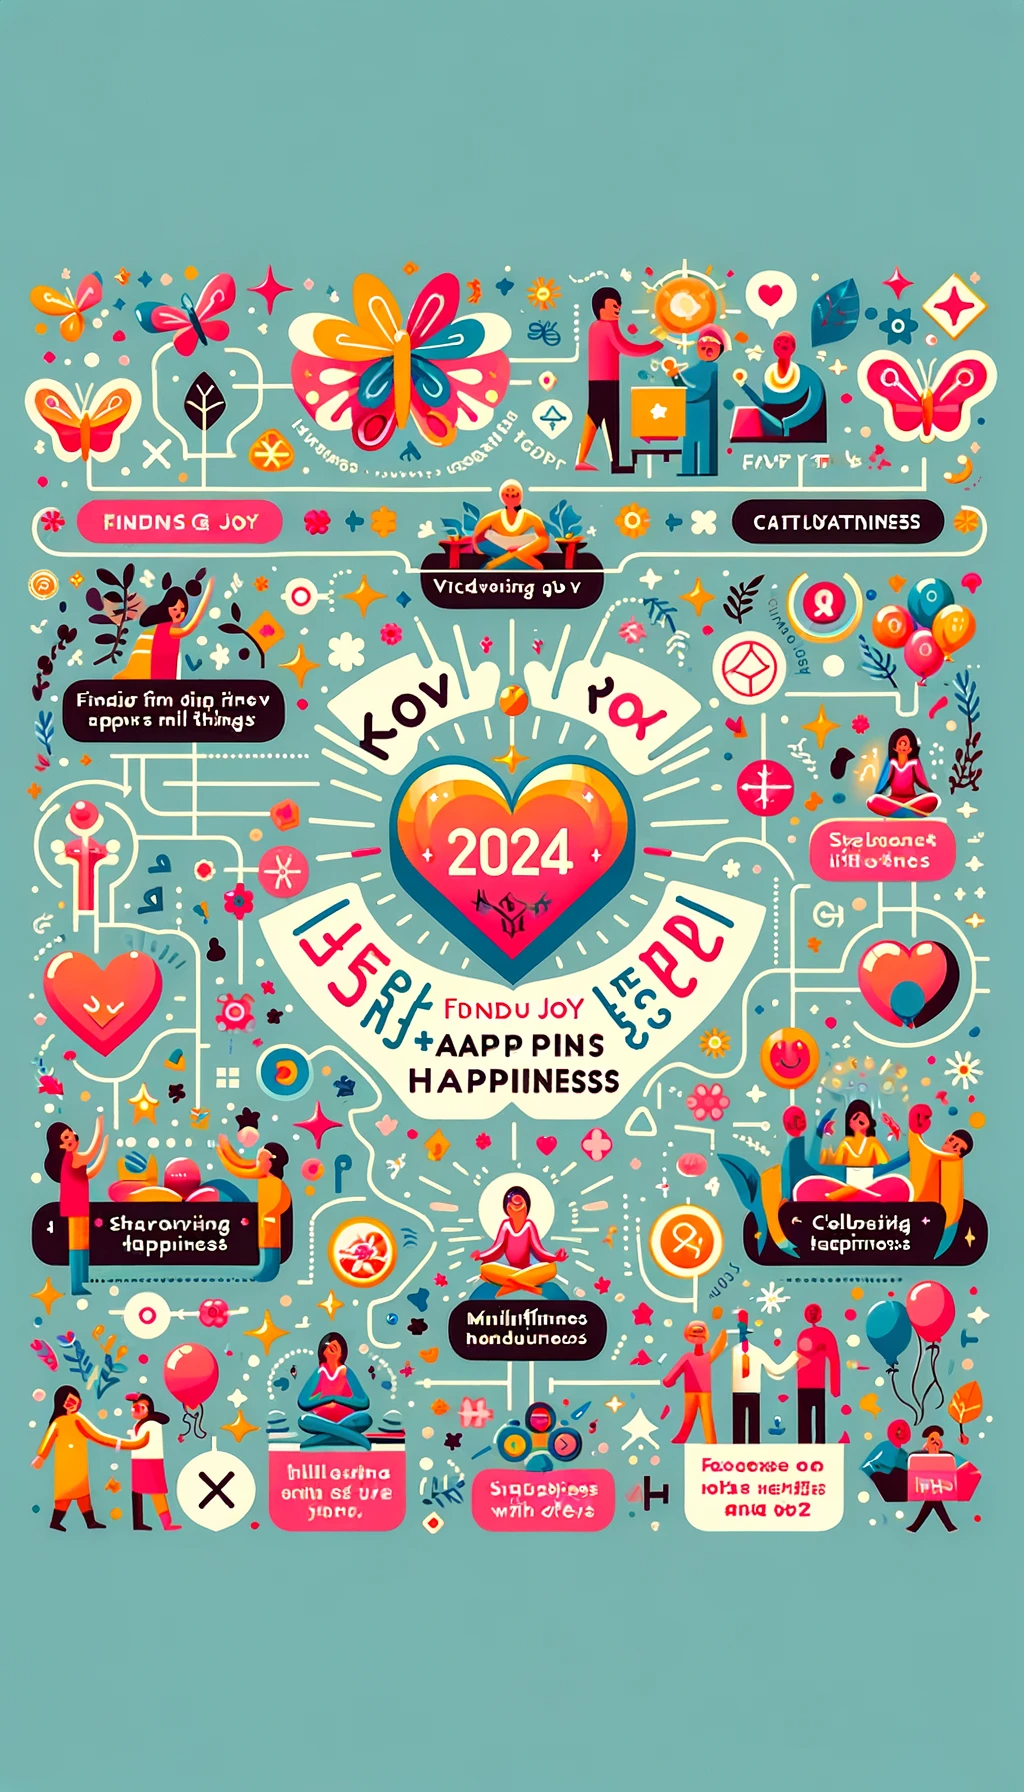 New Year Wishes & Images for 2024 Joy and Happiness